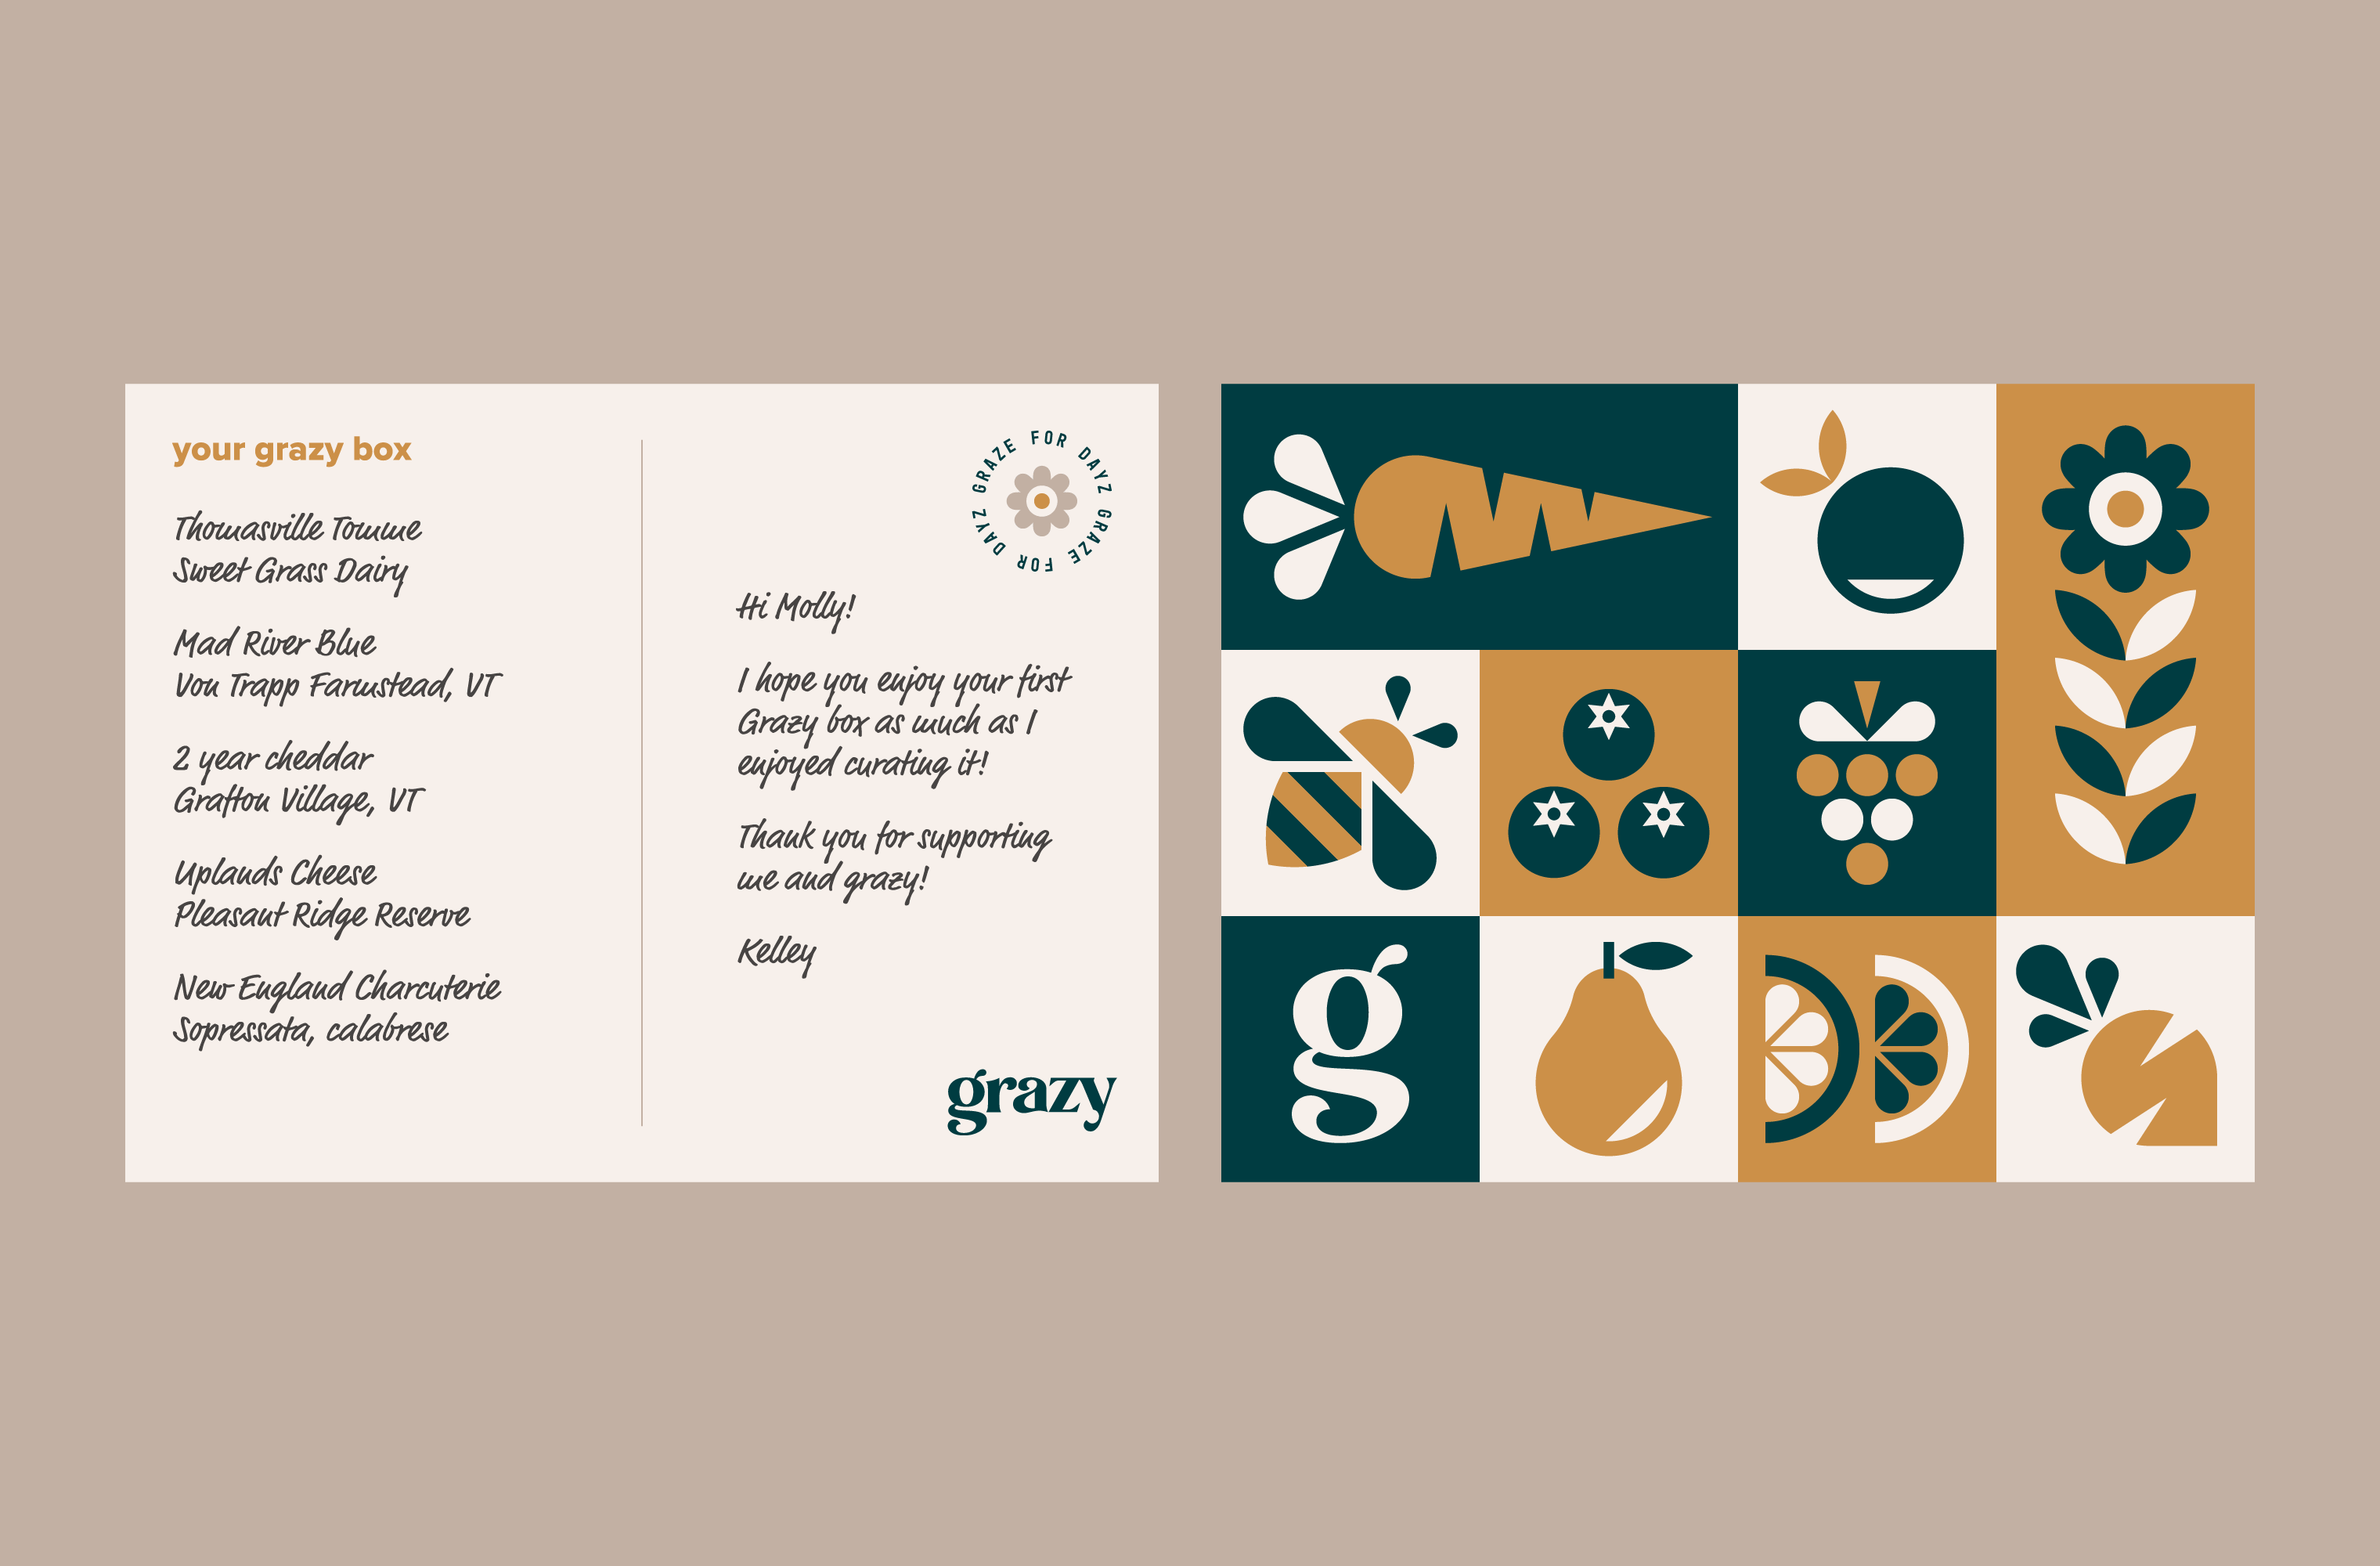 Front and back of the Grazy notecard that describes the box ingredients